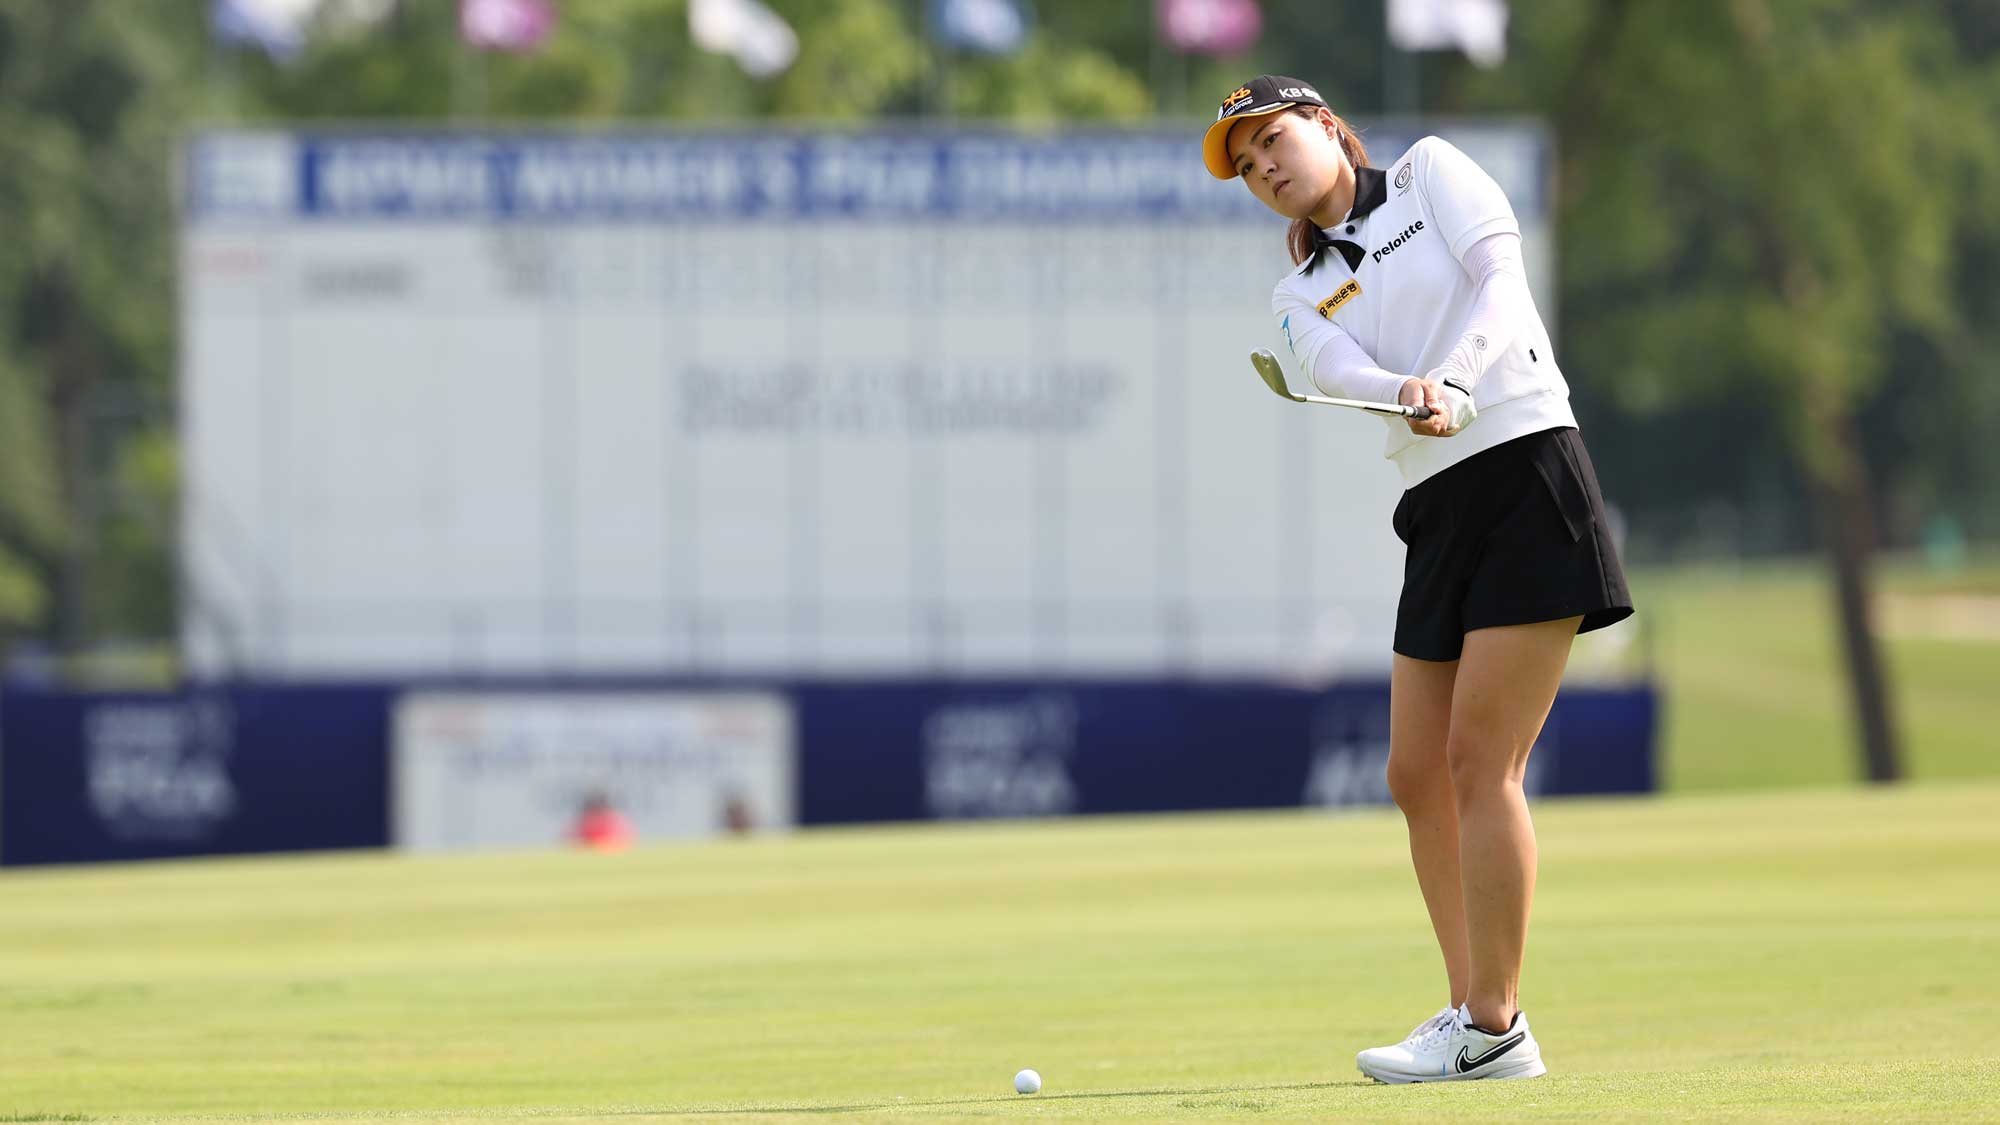 Chun’s day got better as it moved along | LPGA | Ladies Professional ...